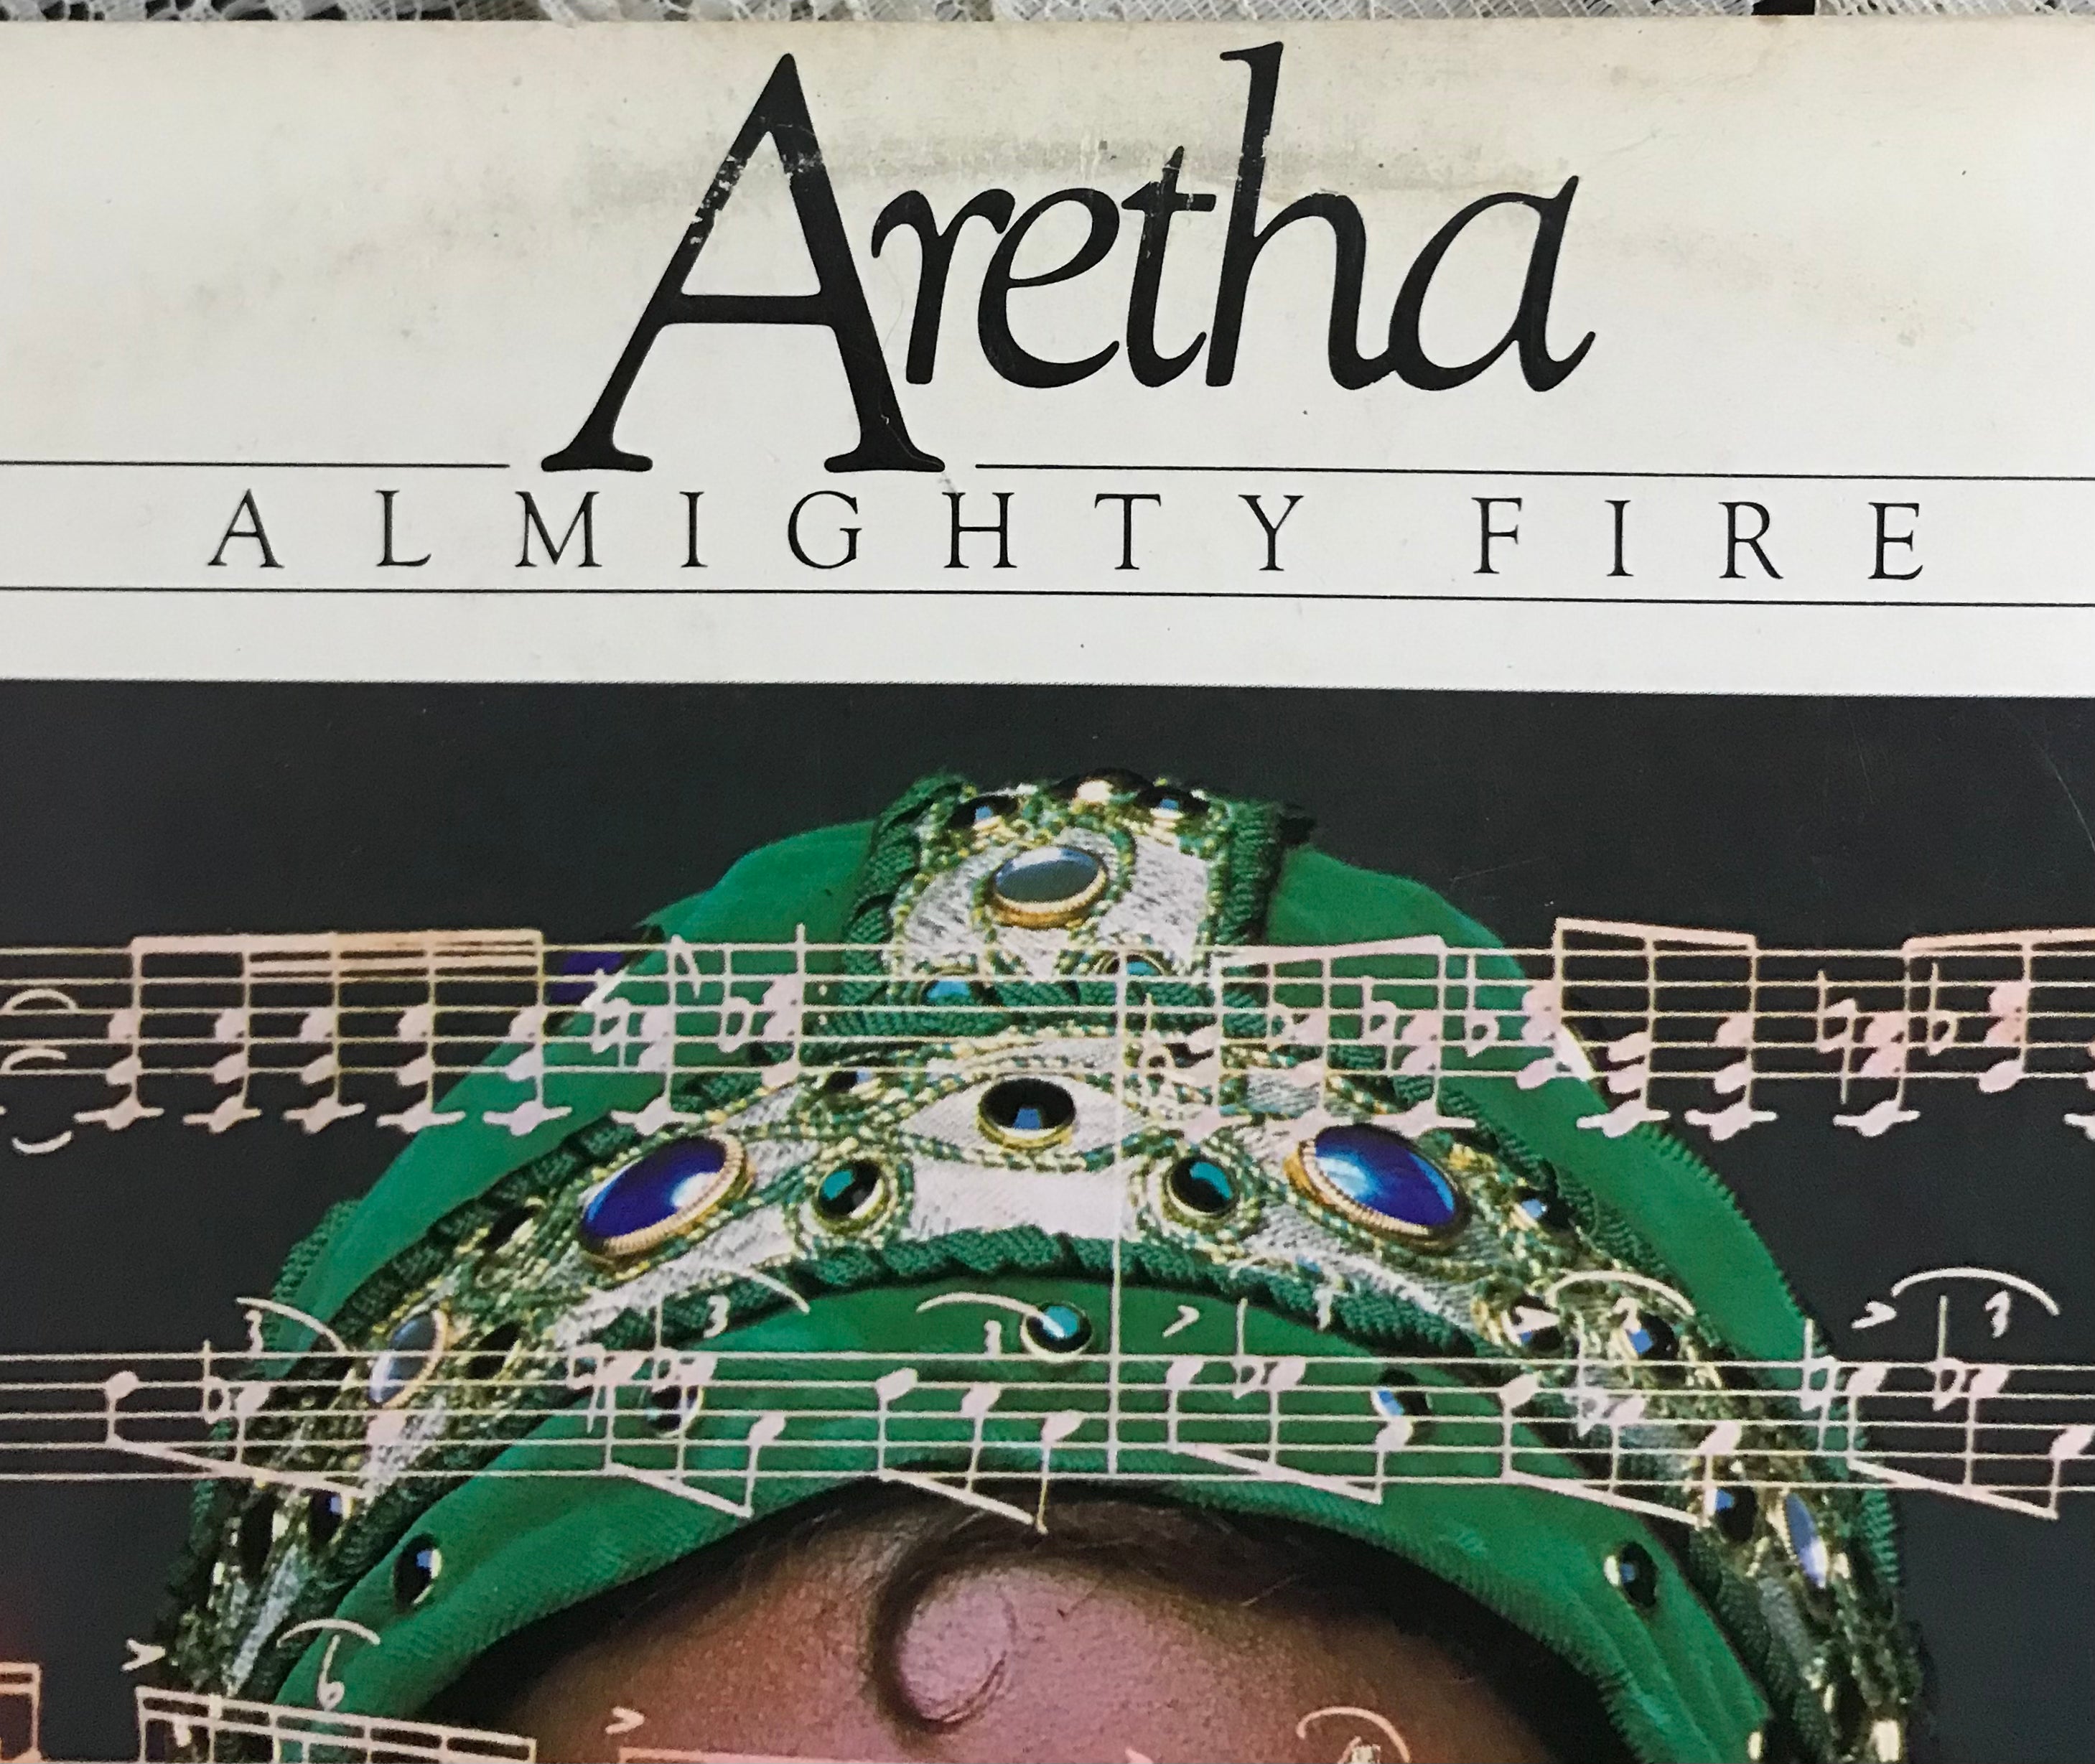 Aretha Franklin Get It Right Album Cover Notebook